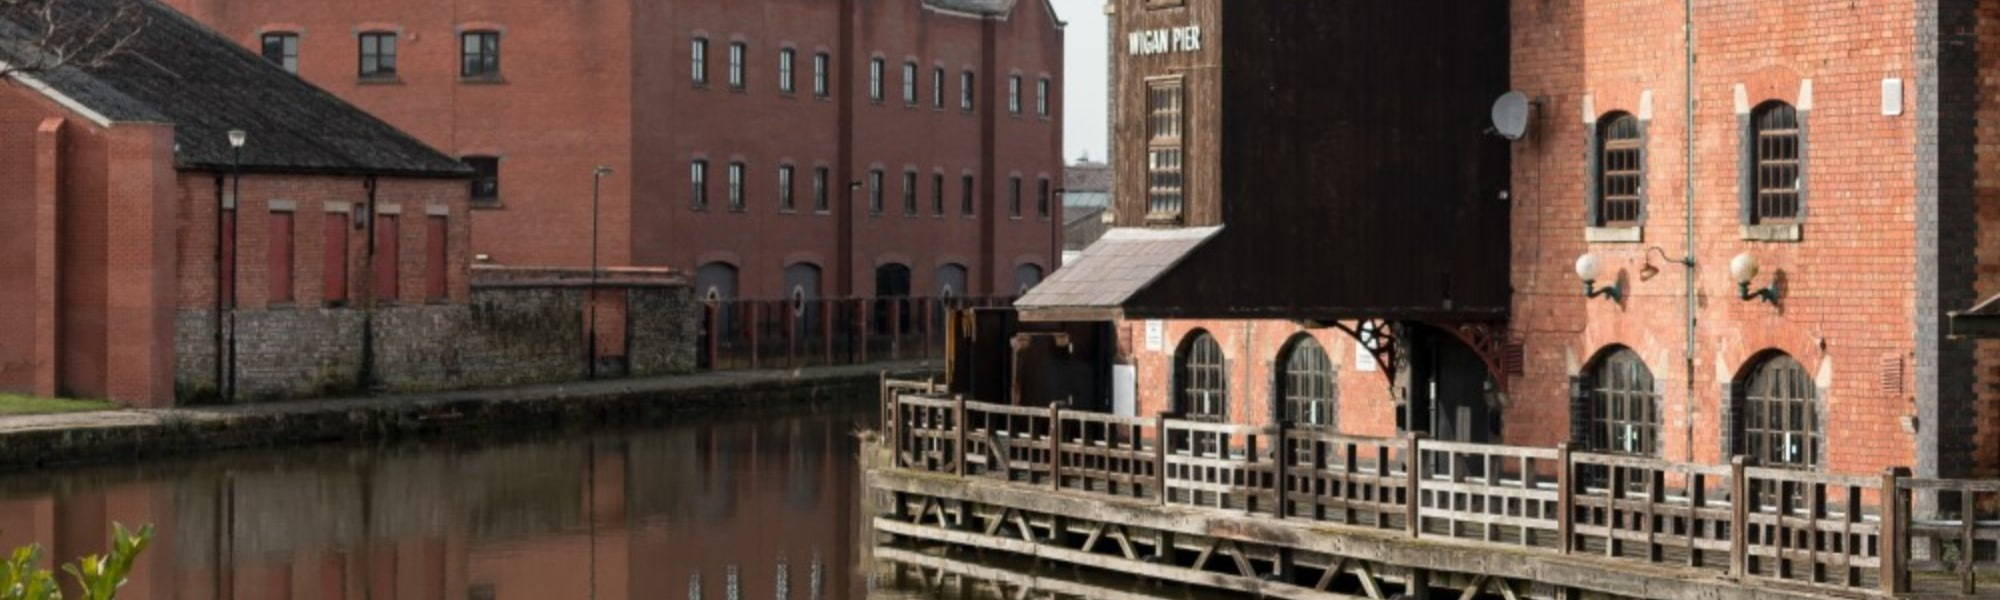 picture of Wigan pier 